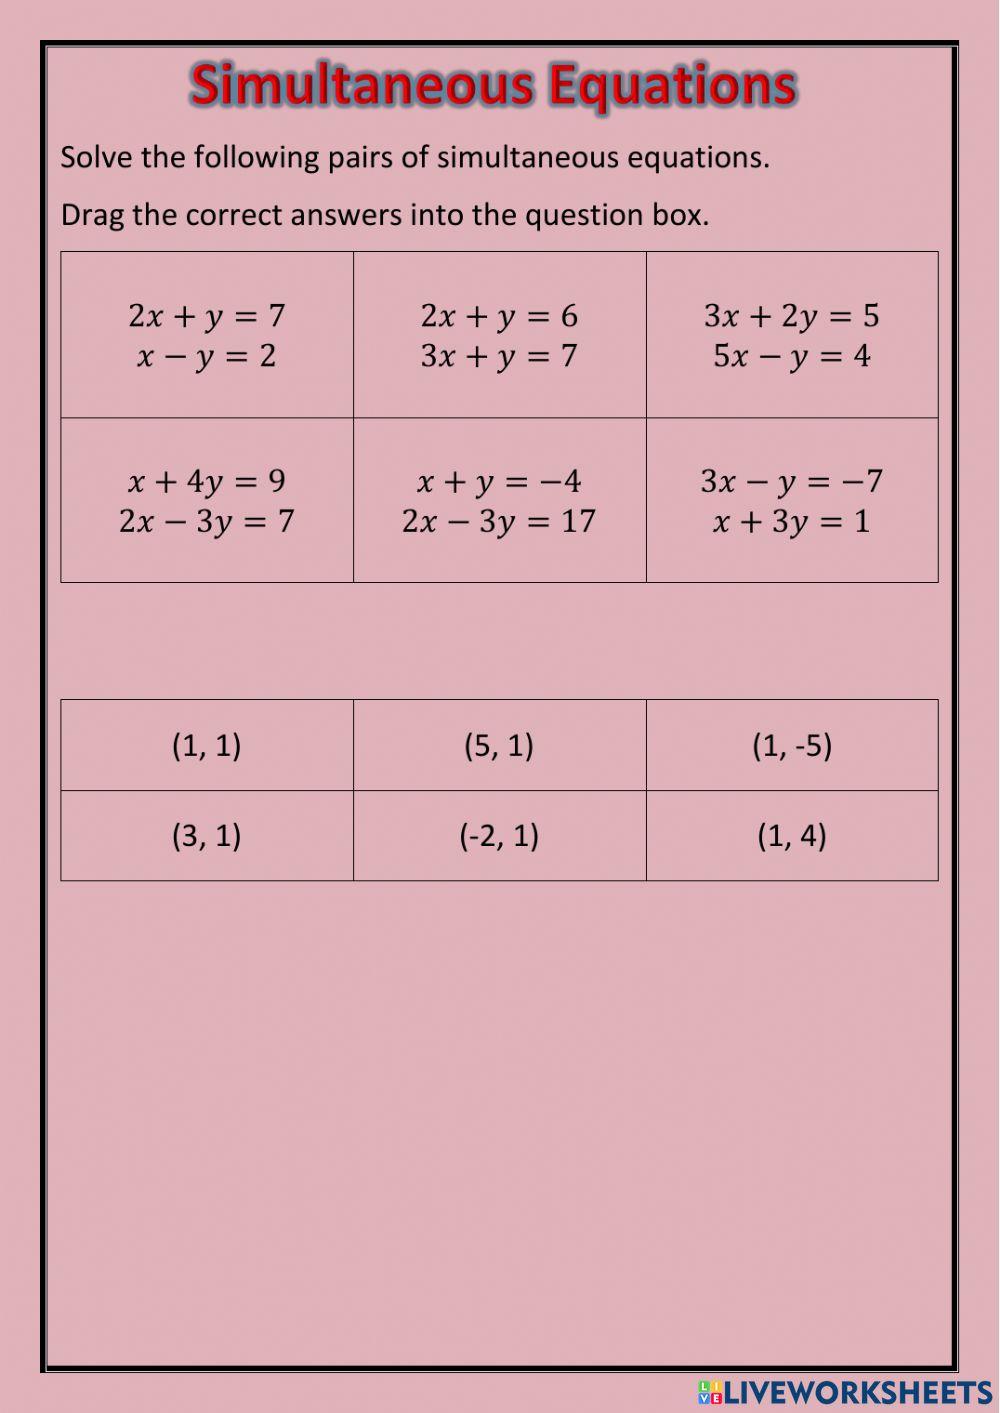 National 5 - Simultaneous Equations